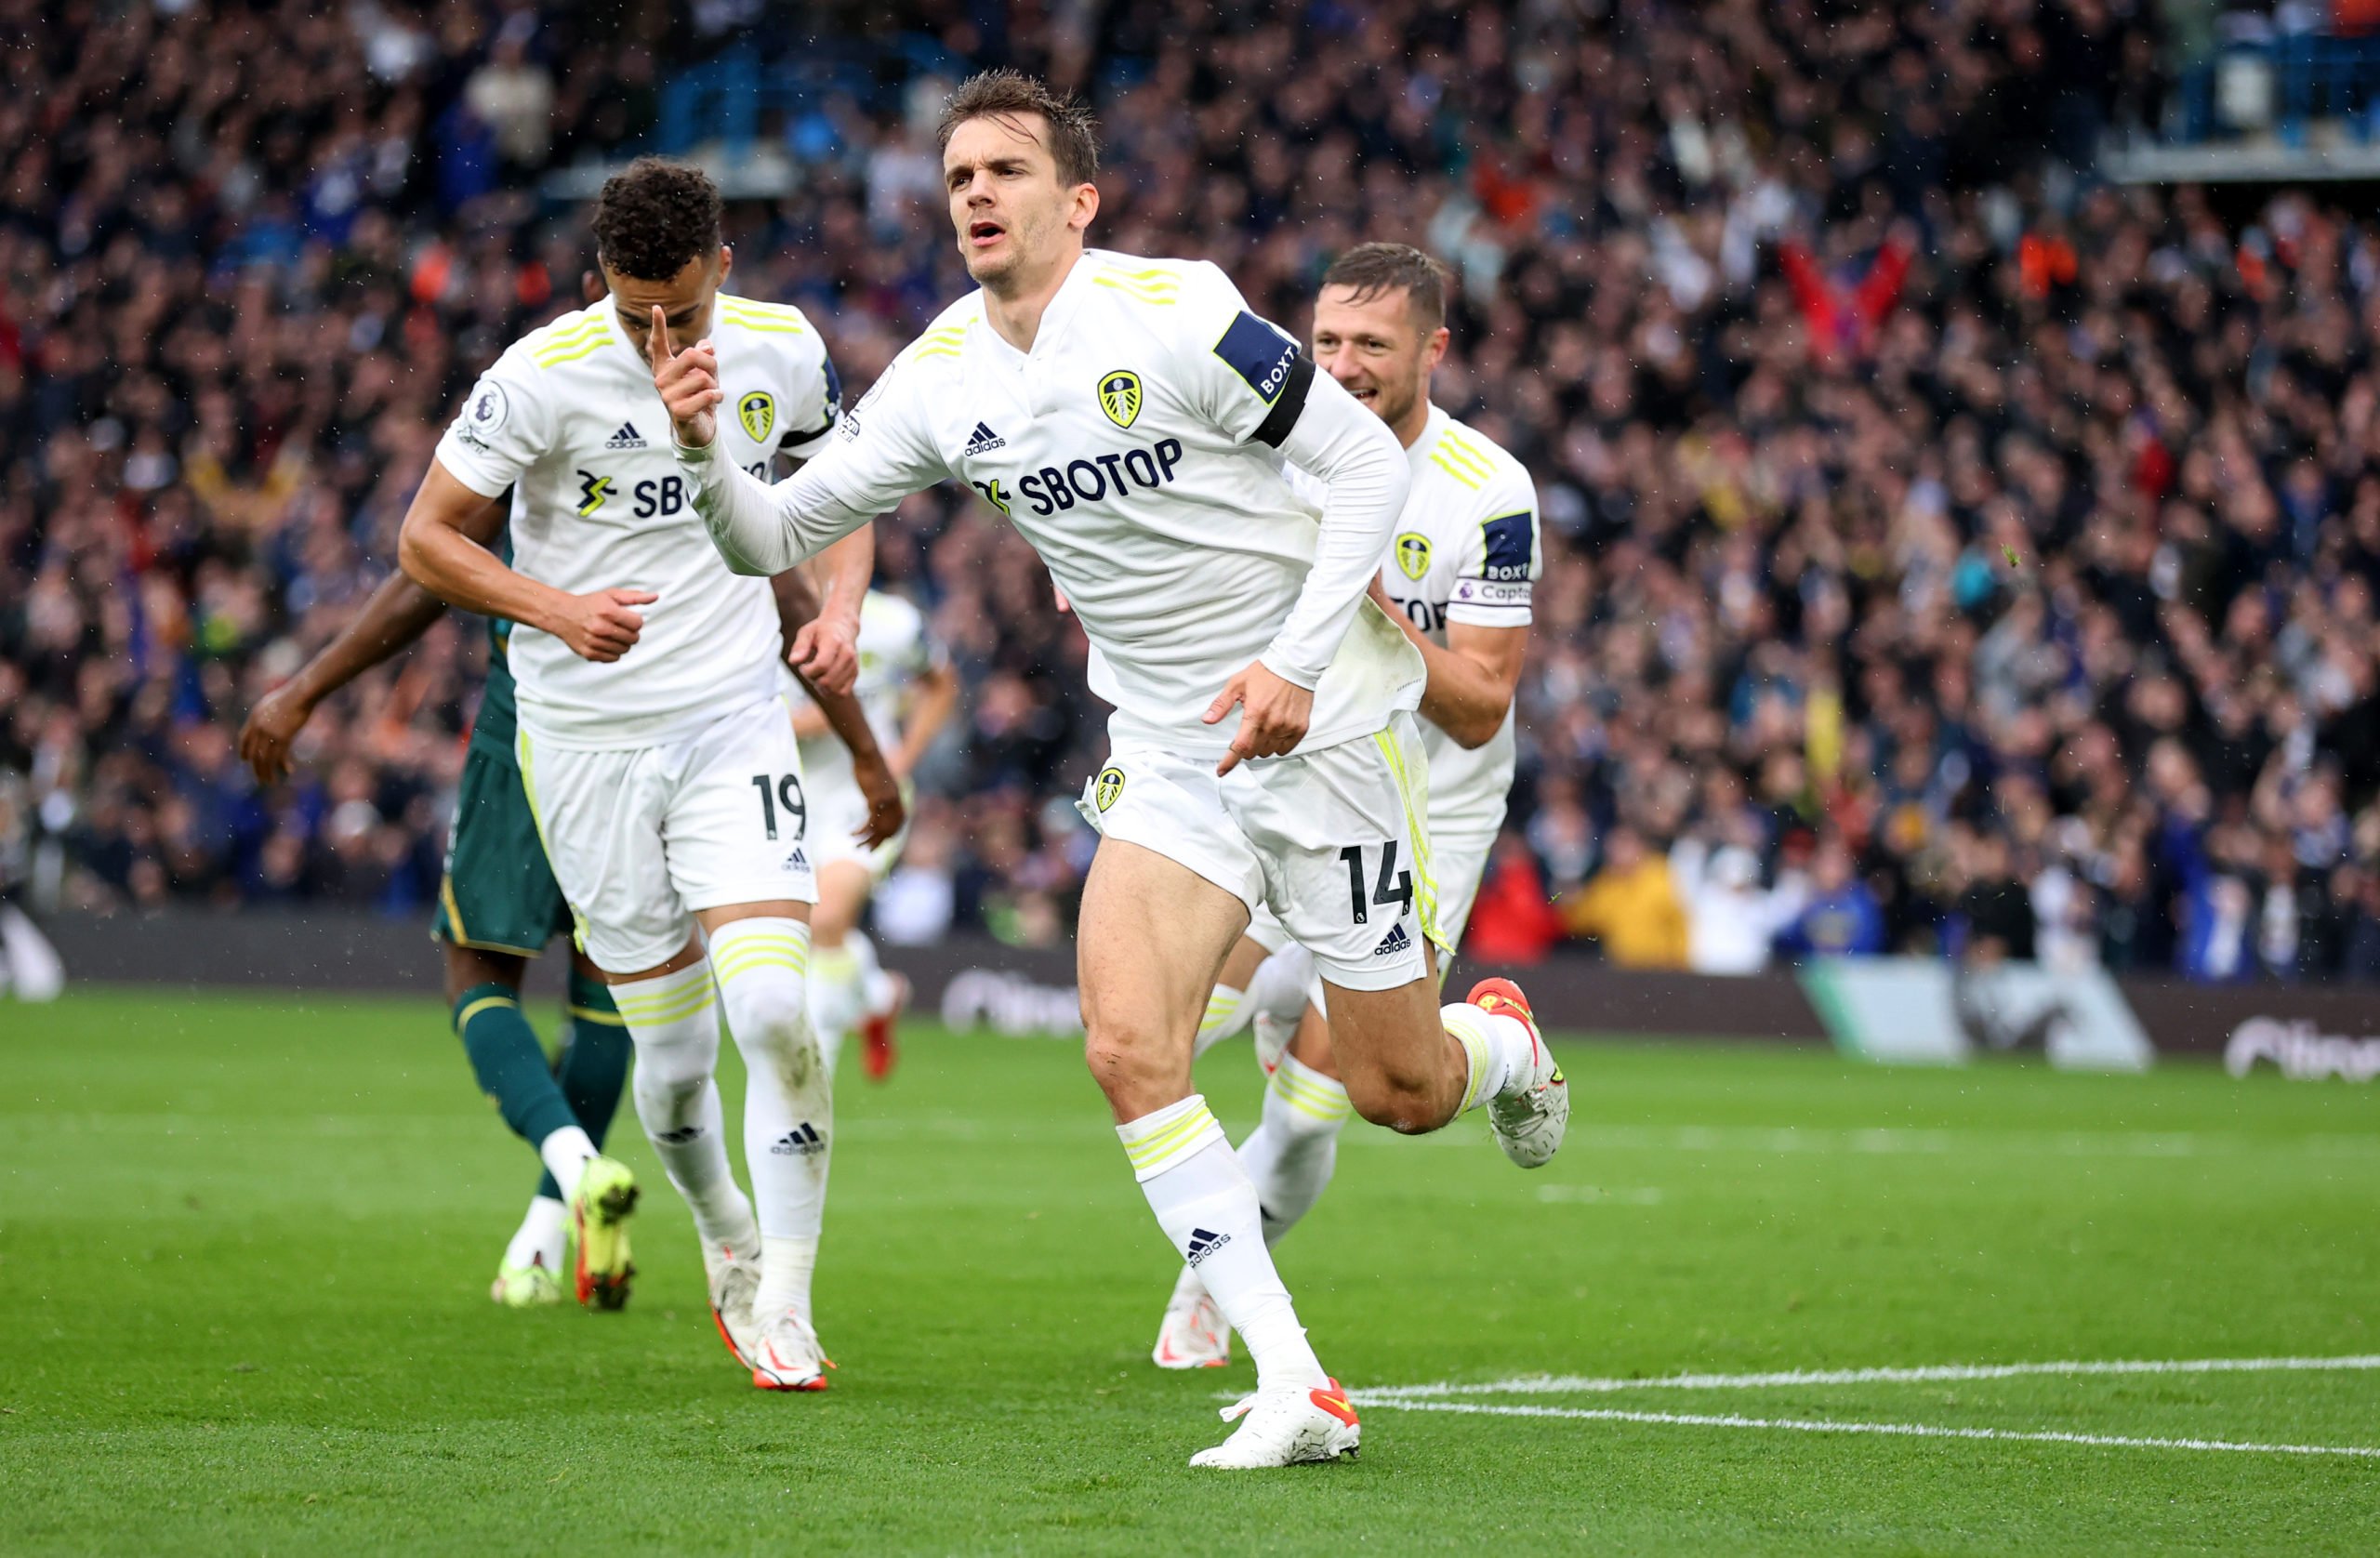 Leeds United players rated in hard-fought win vs Watford (Leeds United players are seen in the photo)